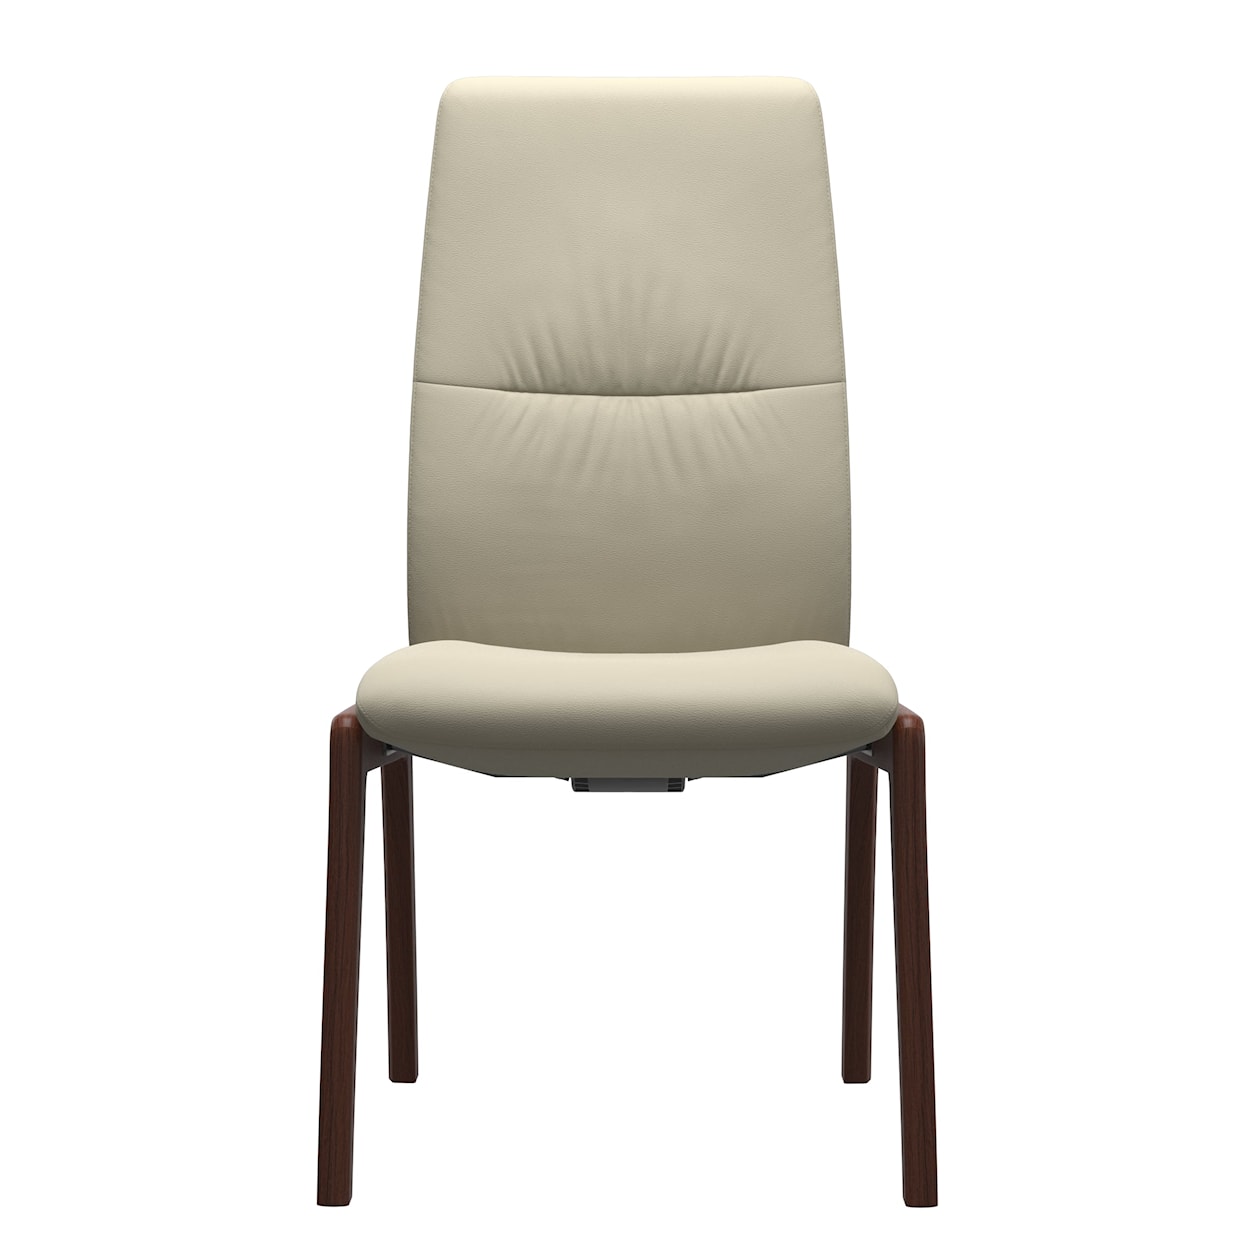 Stressless by Ekornes Stressless Mint Mint Large High-Back Dining Chair D100